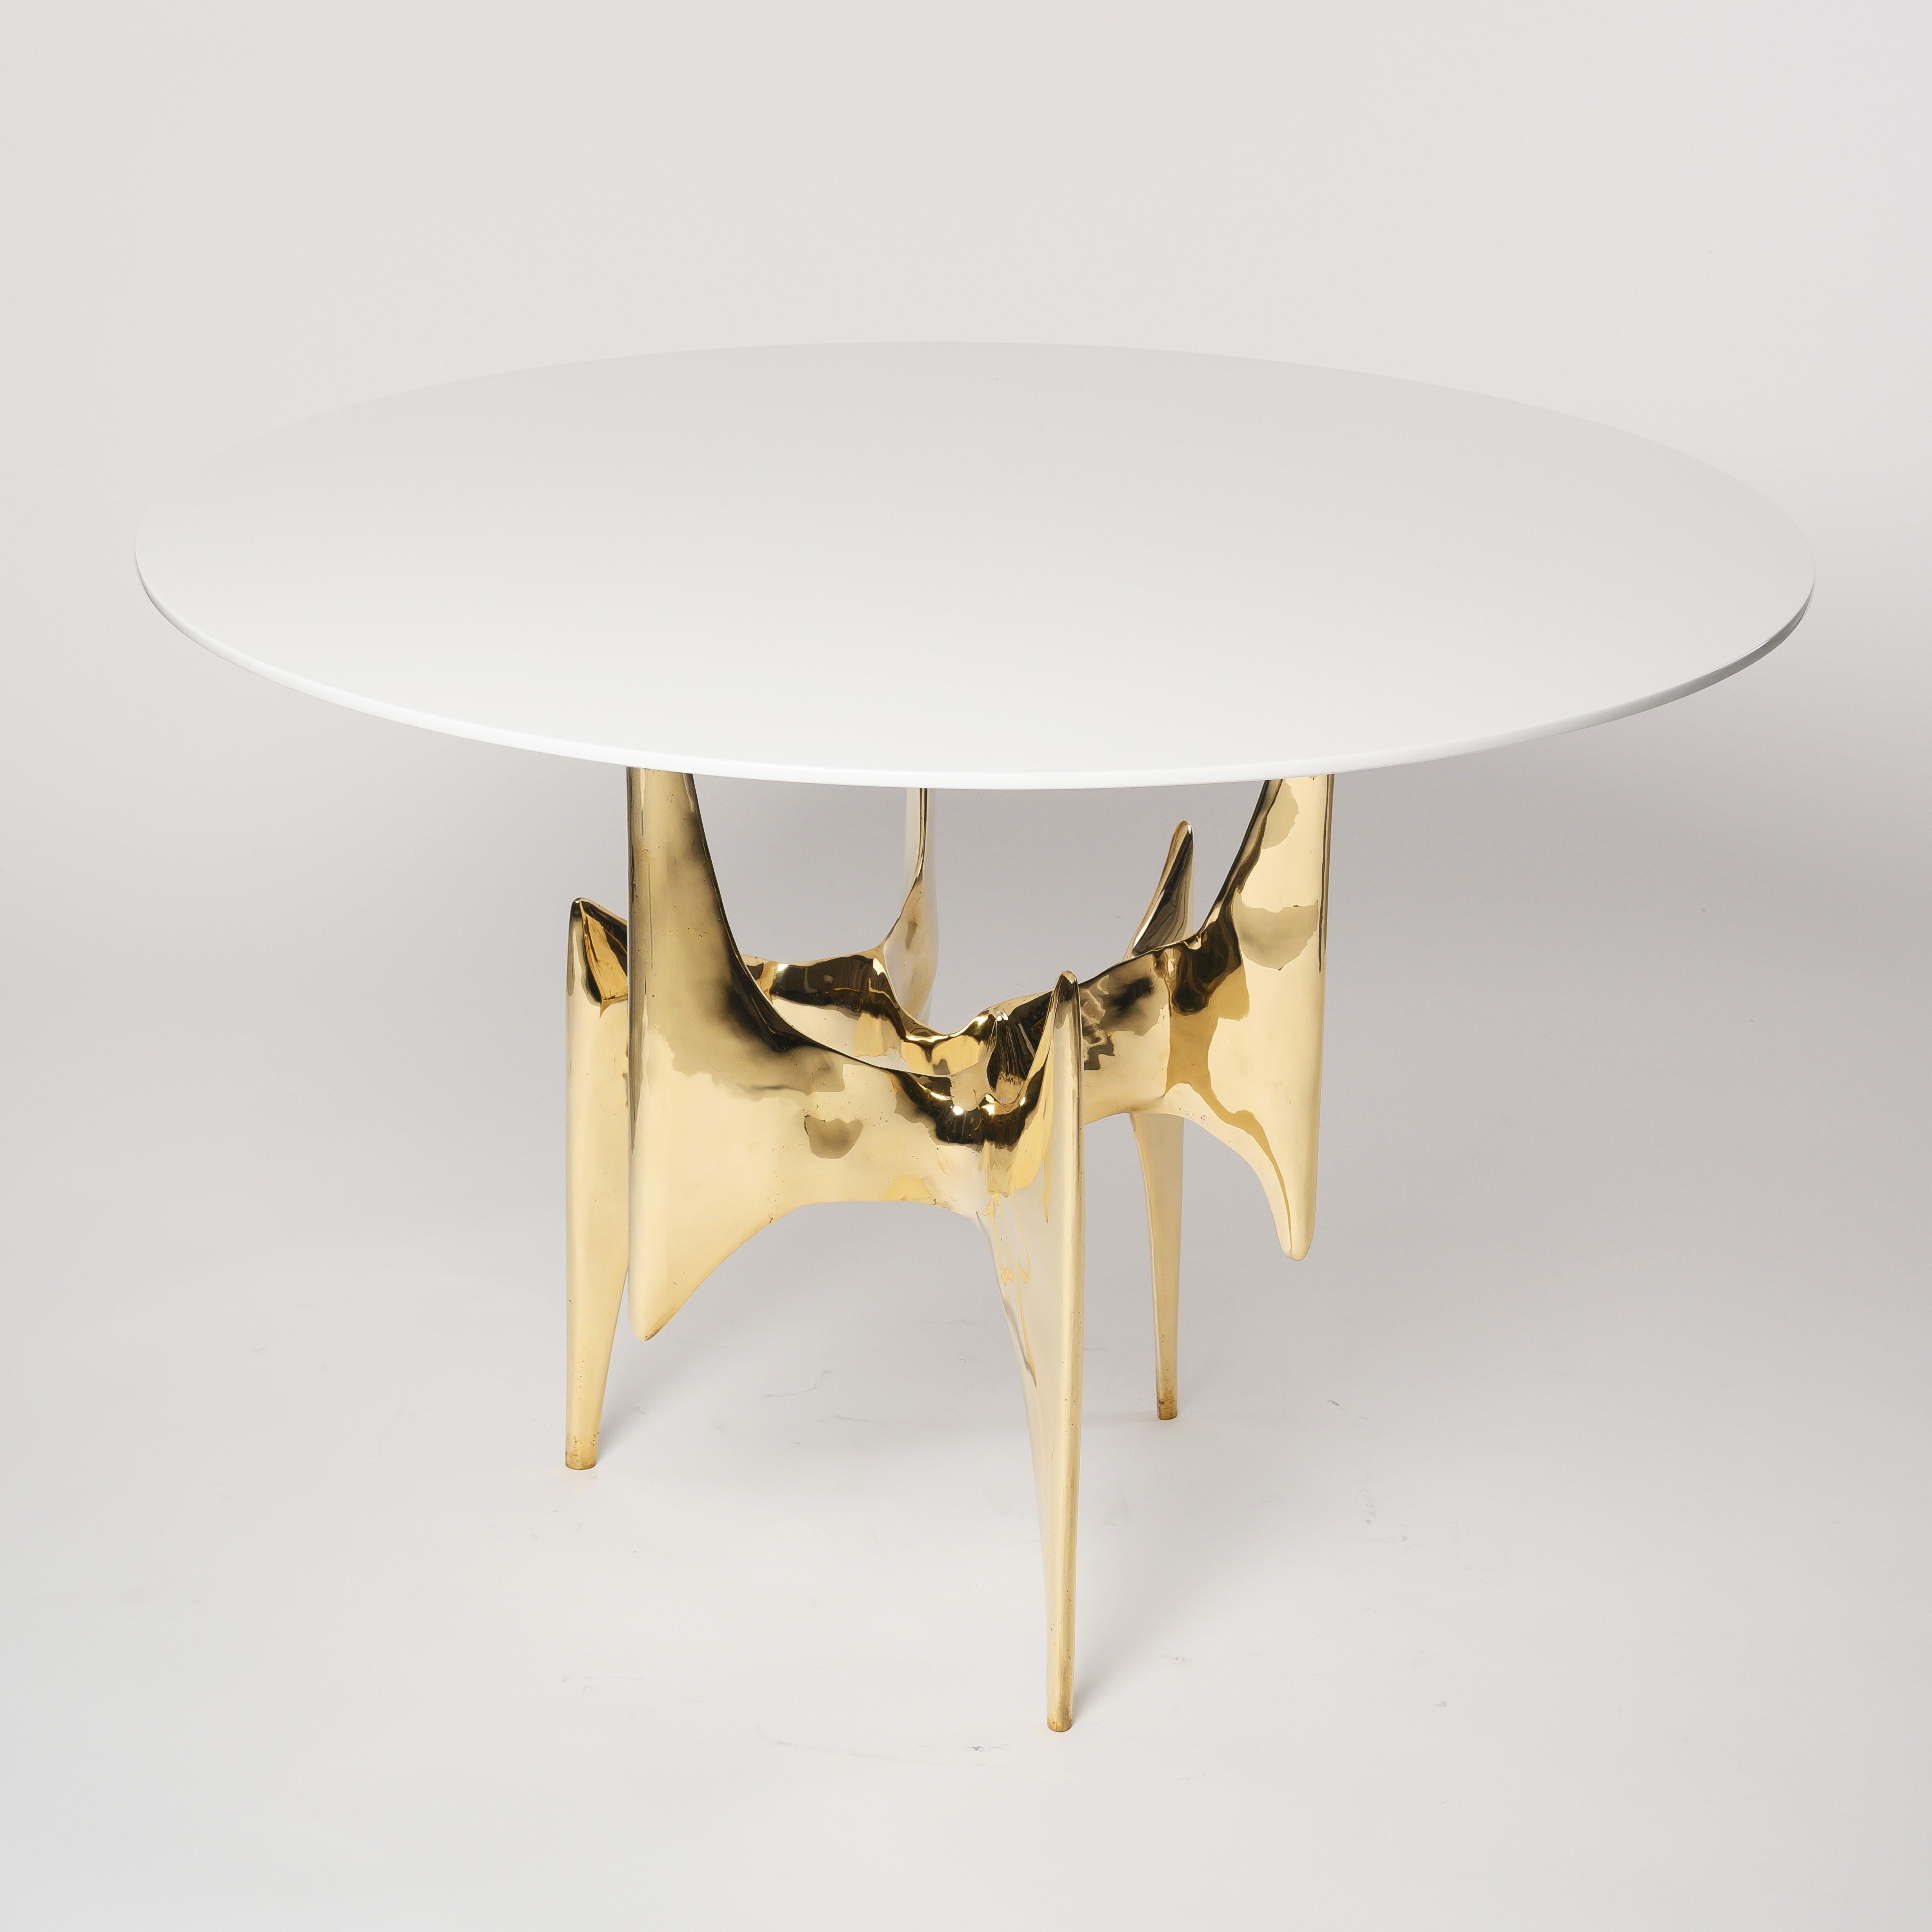 The Ella table is composed of a sculptural bronze base in a polished gold brass, finish. 

Ella is a modern interpretation on the great sculptors of the French Modernist period. 

The tabletop is shown in a white gloss lacquer and base is polished